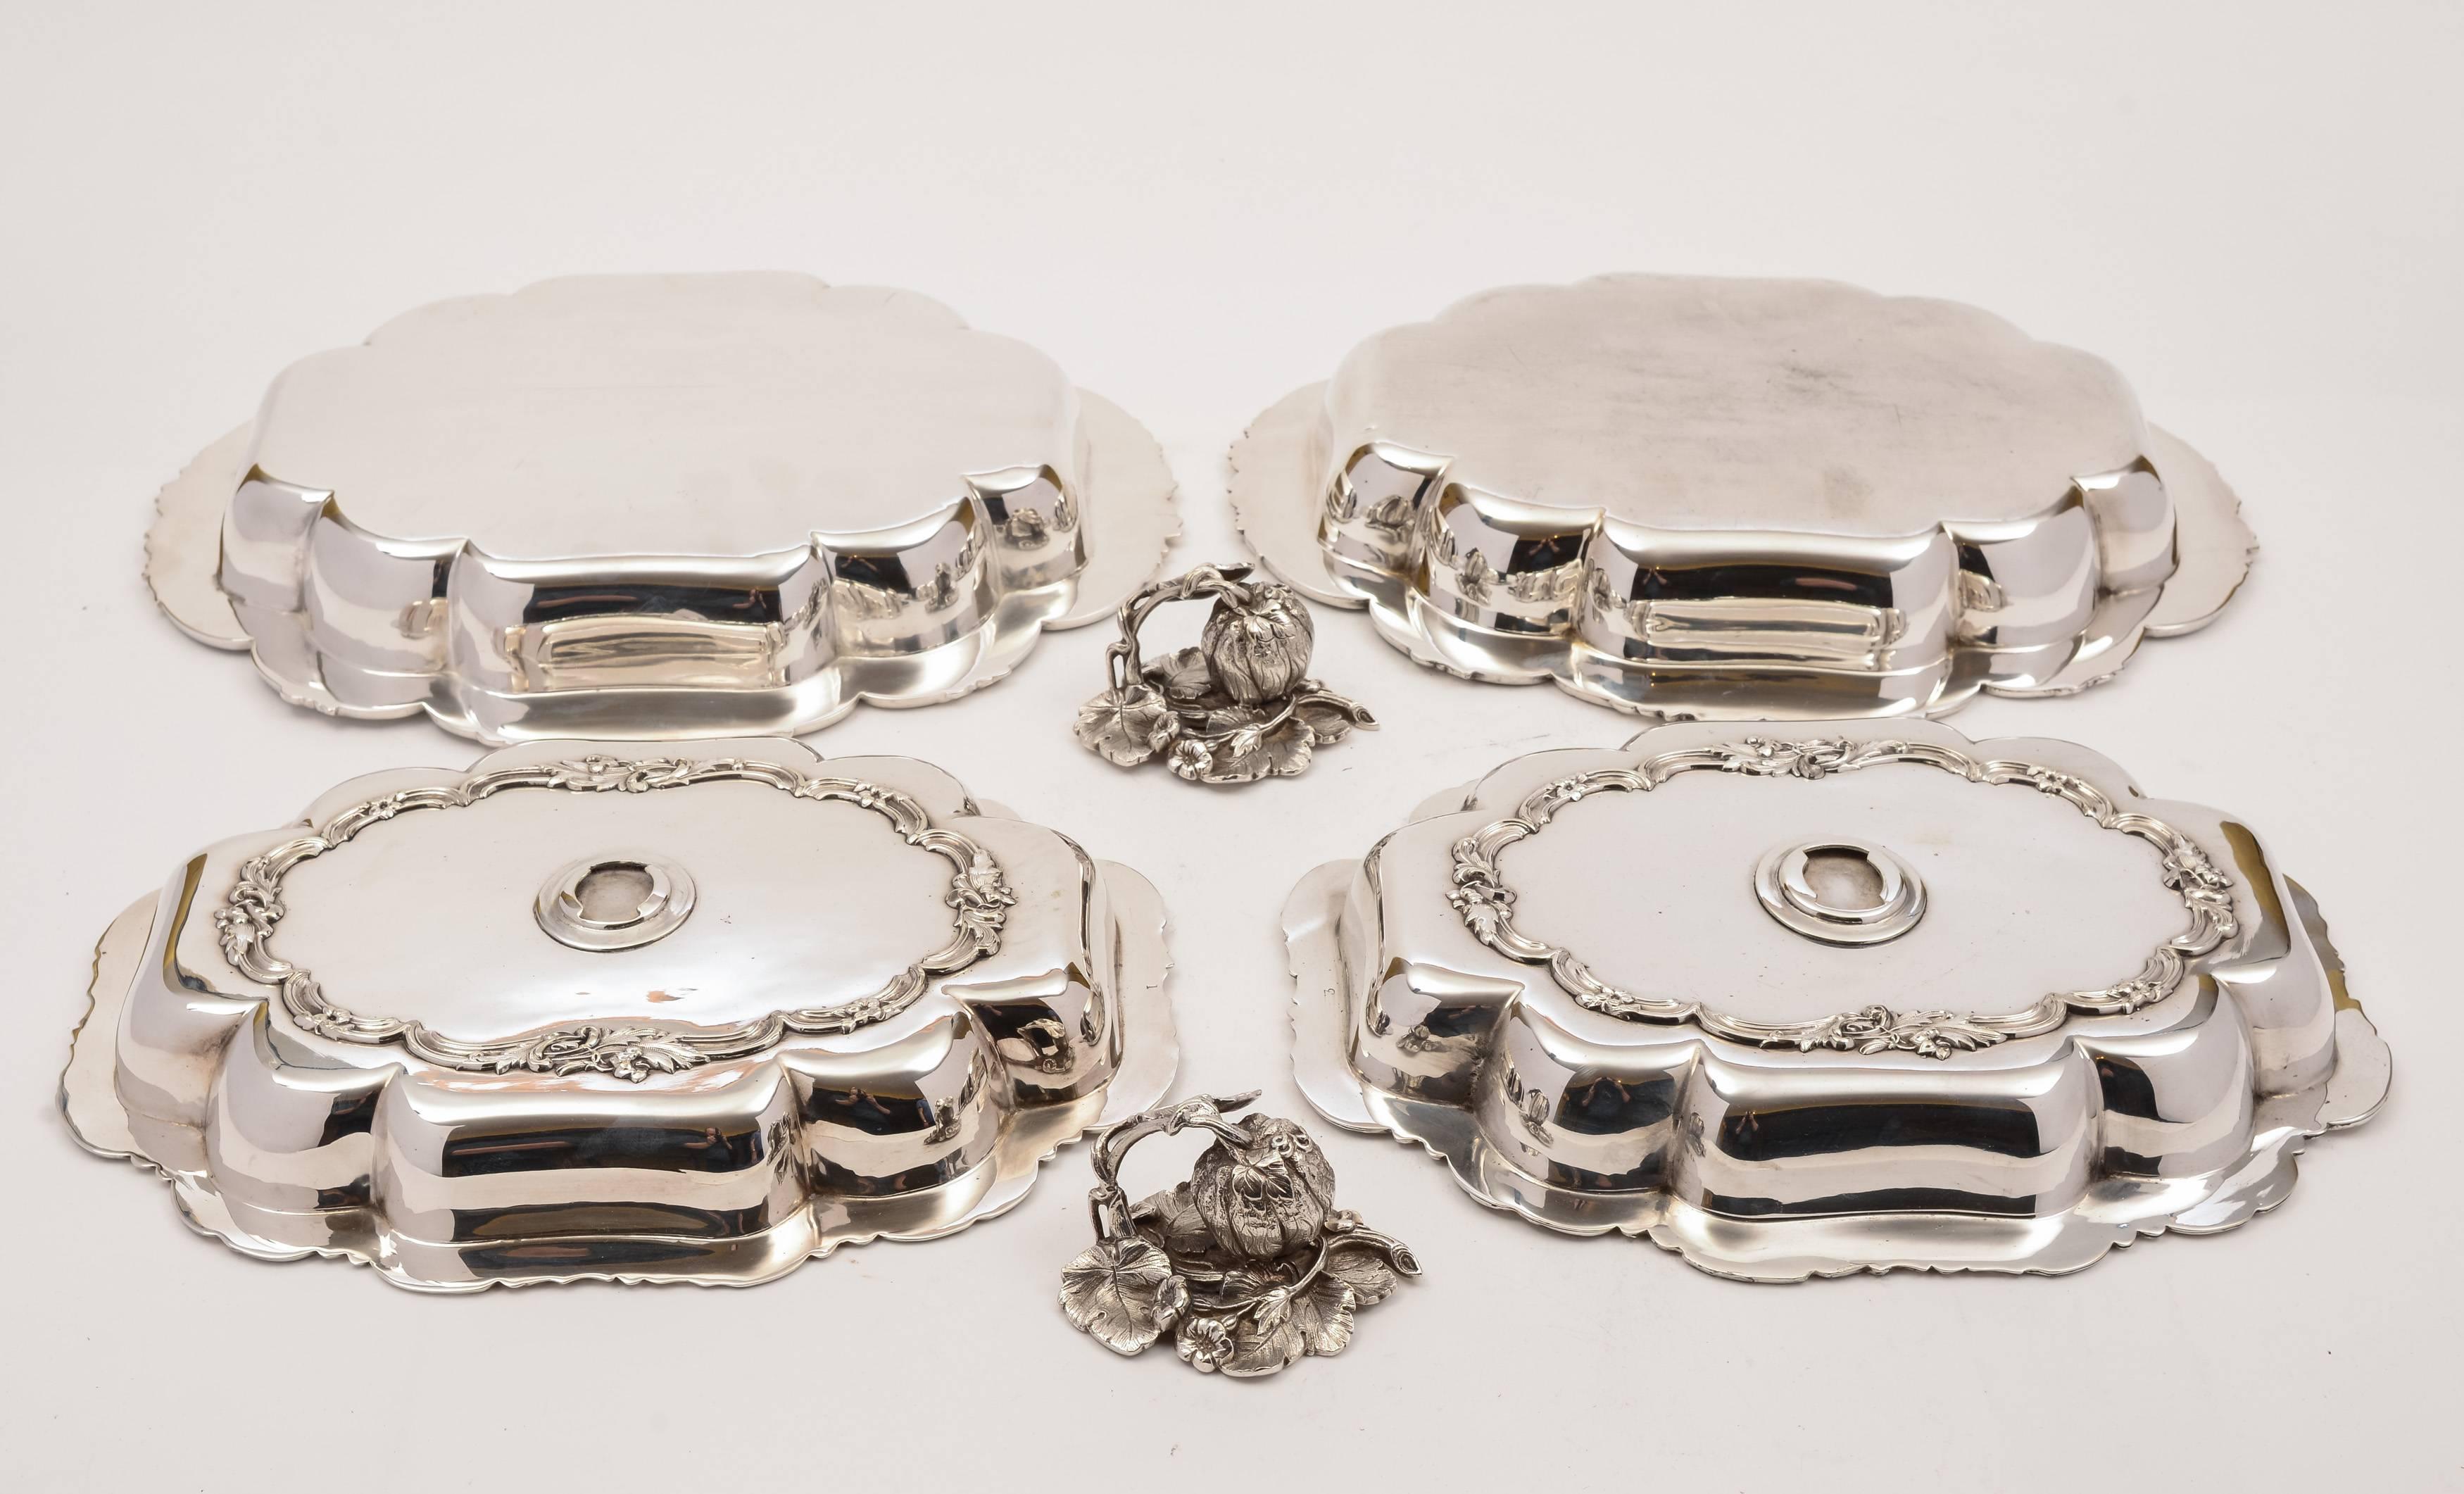 A stunning pair of large English Victorian silver plated entree dishes with beautifully moulded pumpkin handles which can be detached, making a set of four open dishes if required. These are circa 1870 but have no makers mark. 

Total weight: